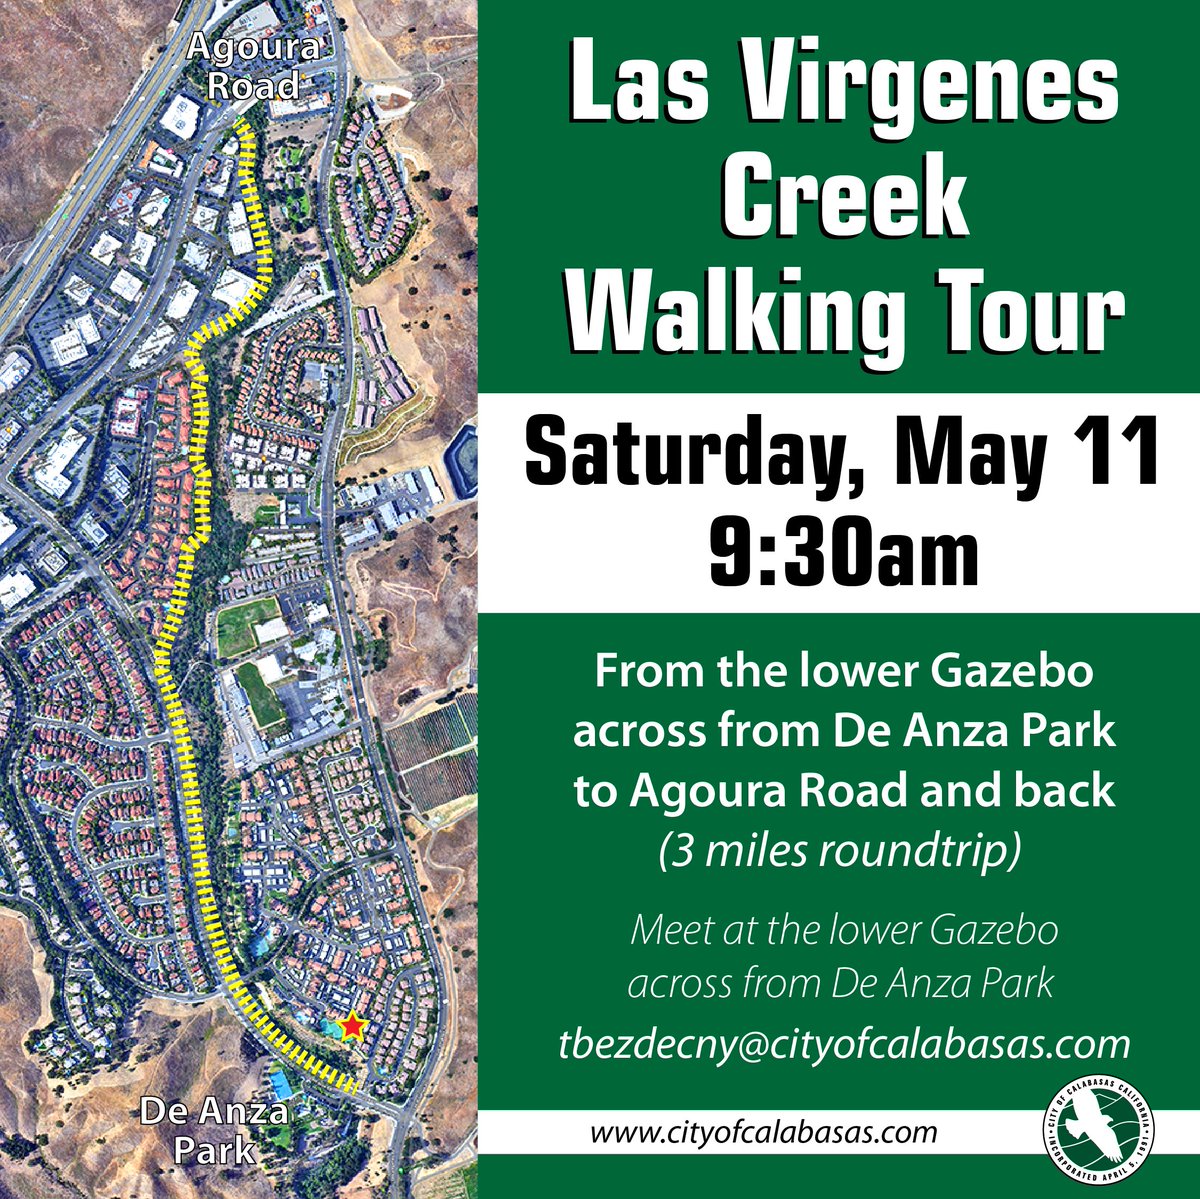 See the latest happenings at the Las Virgenes Creek. City engineers are holding another LV Creek Tour this Saturday. Lots of projects on the horizon. Start at the gazebo across from De Anza Park at 9:30a.